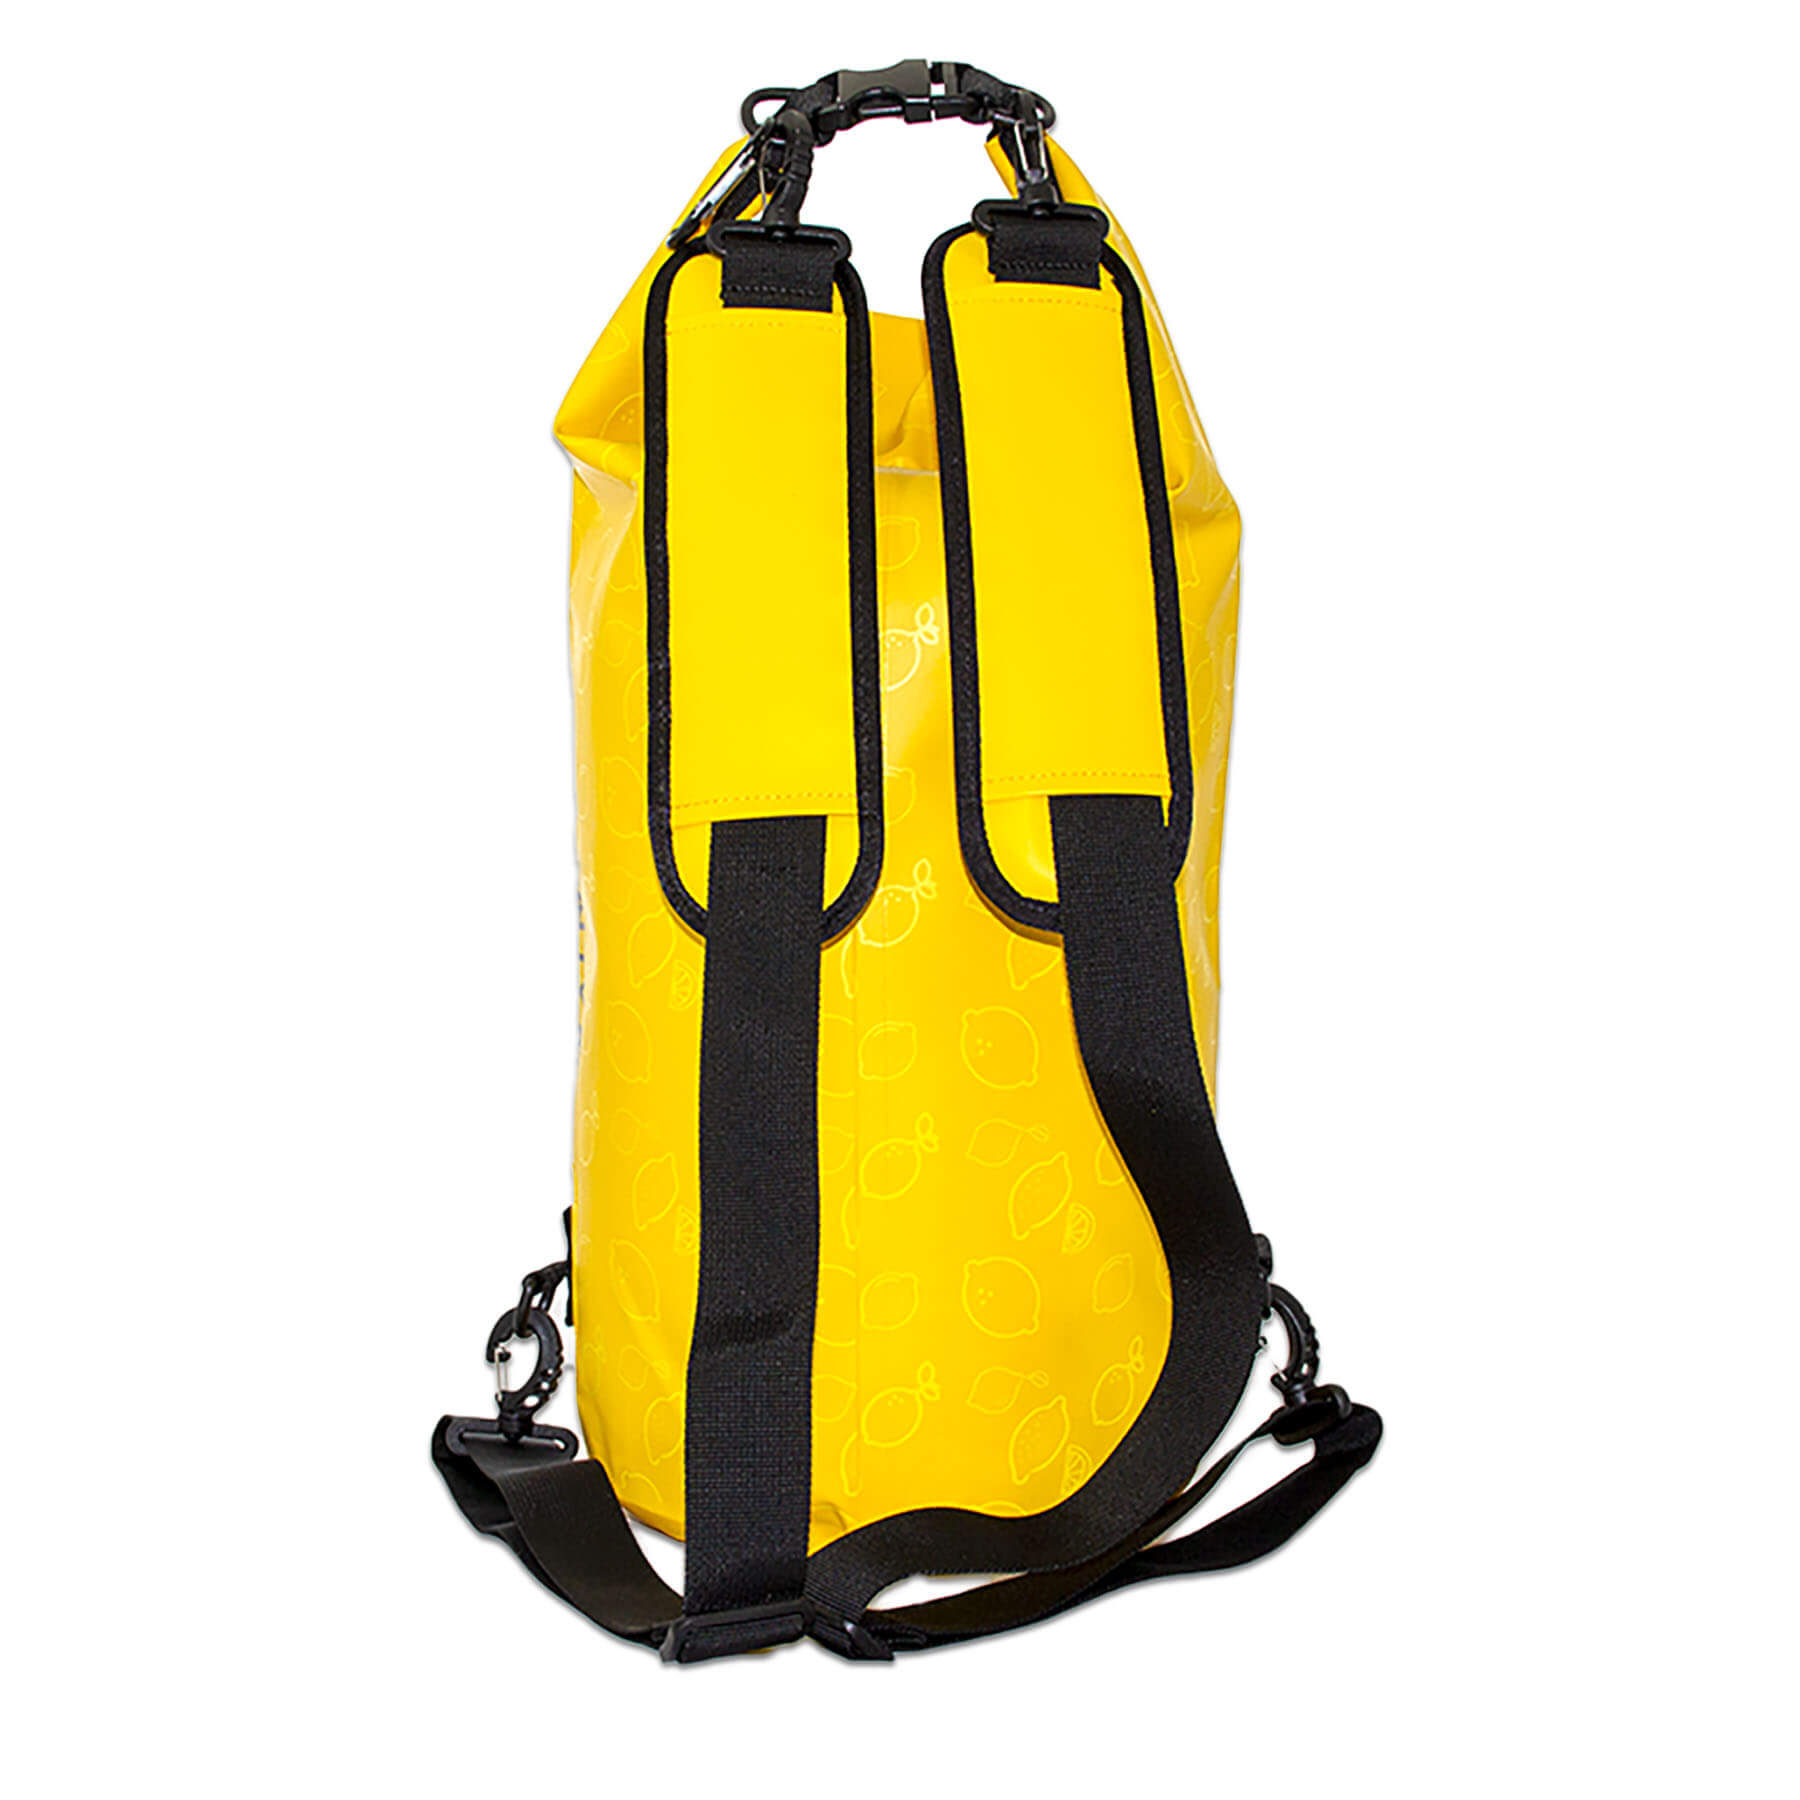 waterproof dry bag 20 litres with detachable comfort straps, D rings and handle in yellow with lemon print design back view